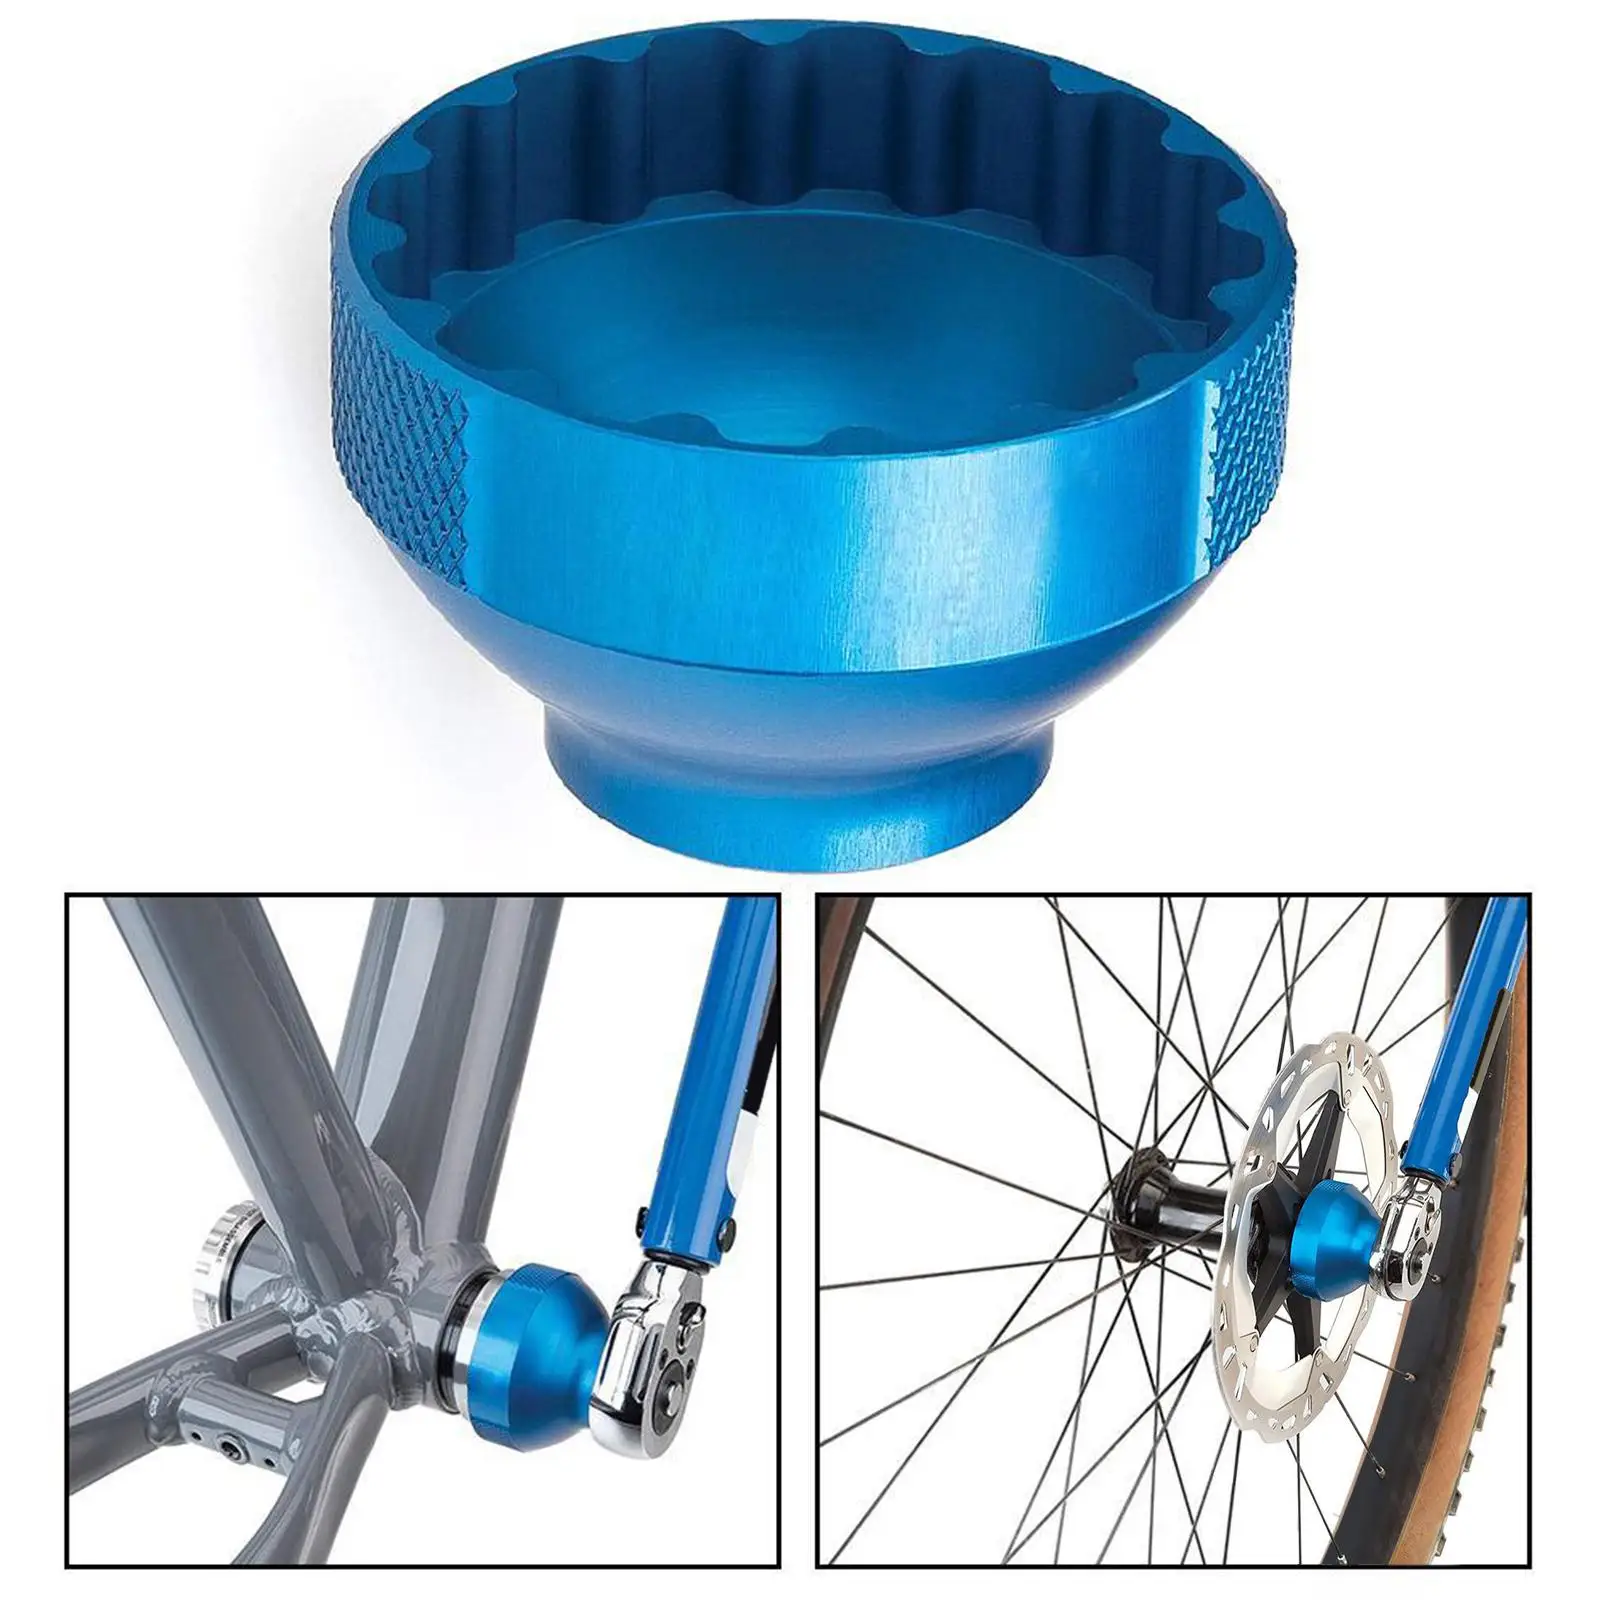 1 Piece Bbt-69.2 16-Notch 44mm Aluminum Durable Parts Repair Blue Removal Supplies Bottom Bracket Tool for Bicycle Repair Shop